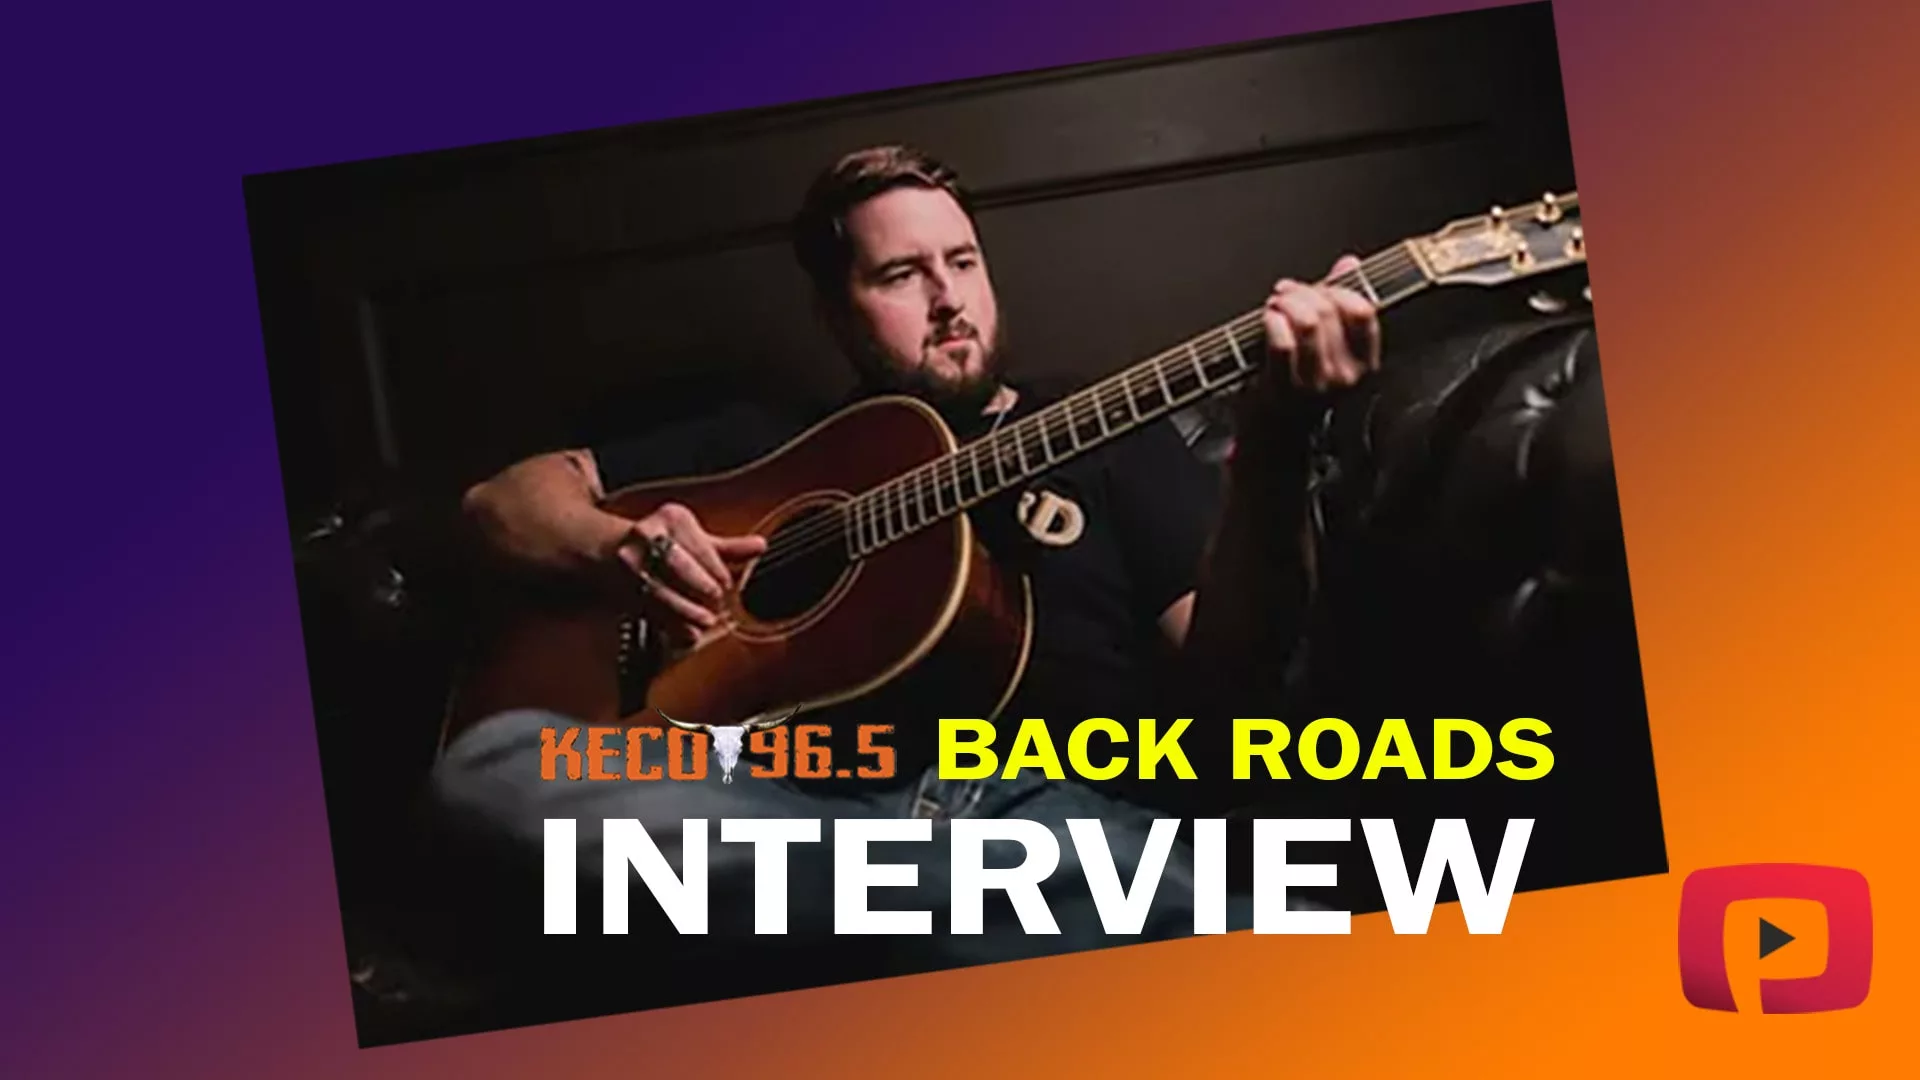 Jake Bush playing his guitar during the Backroads interview